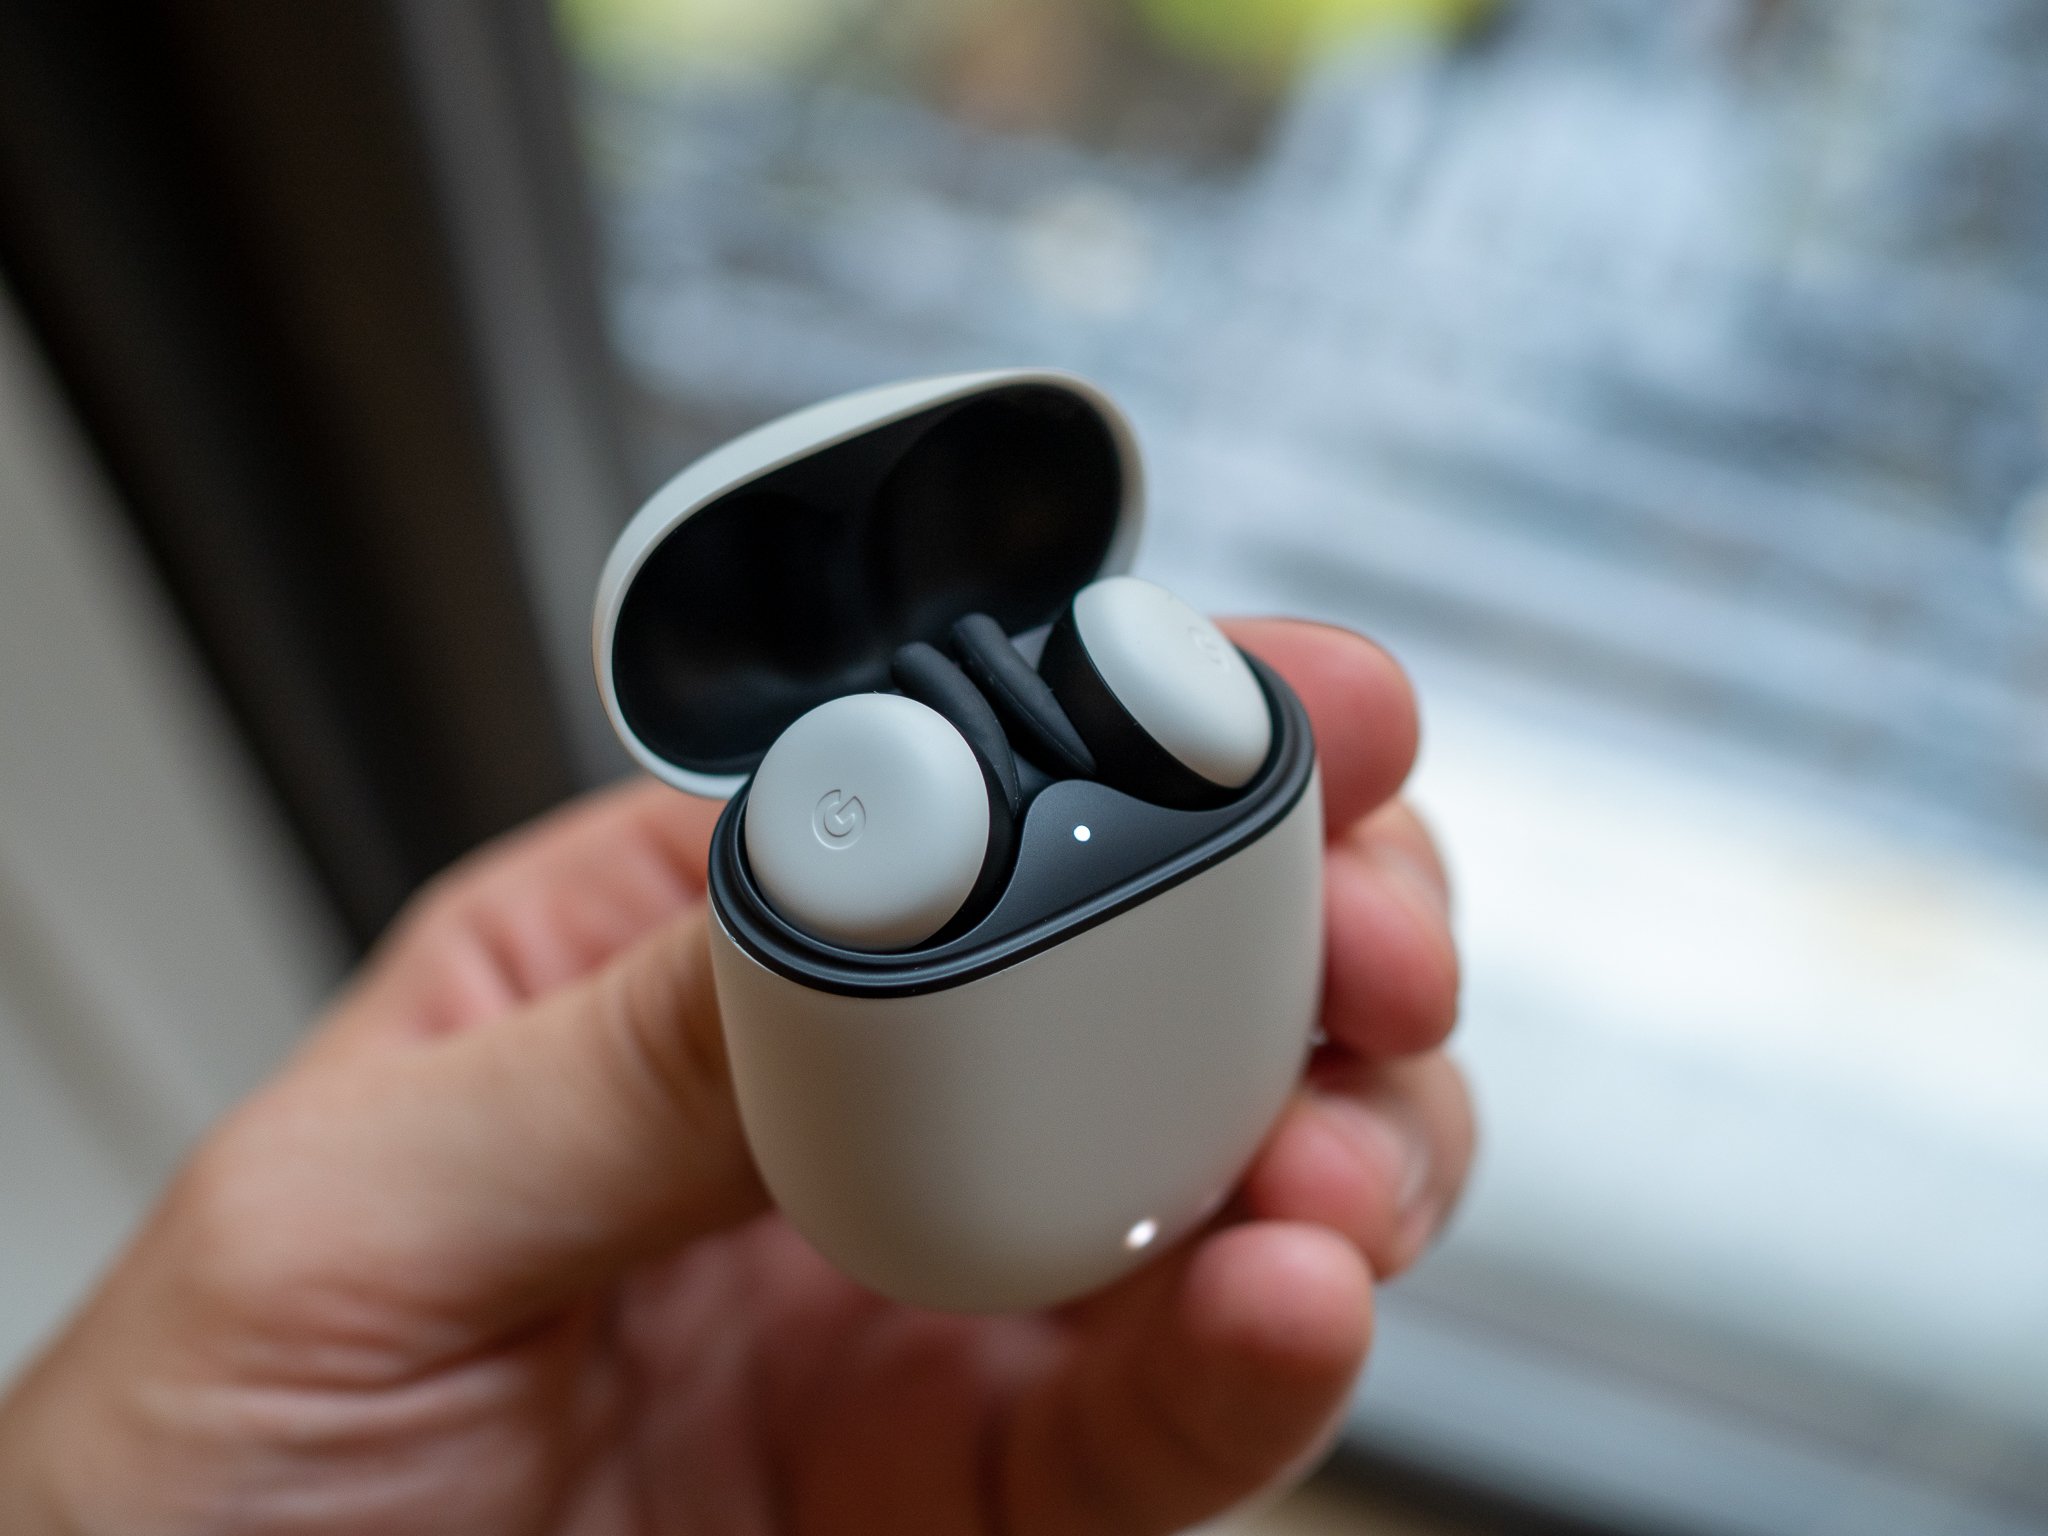 Google upgrades the Pixel Buds with their first feature drop, adding